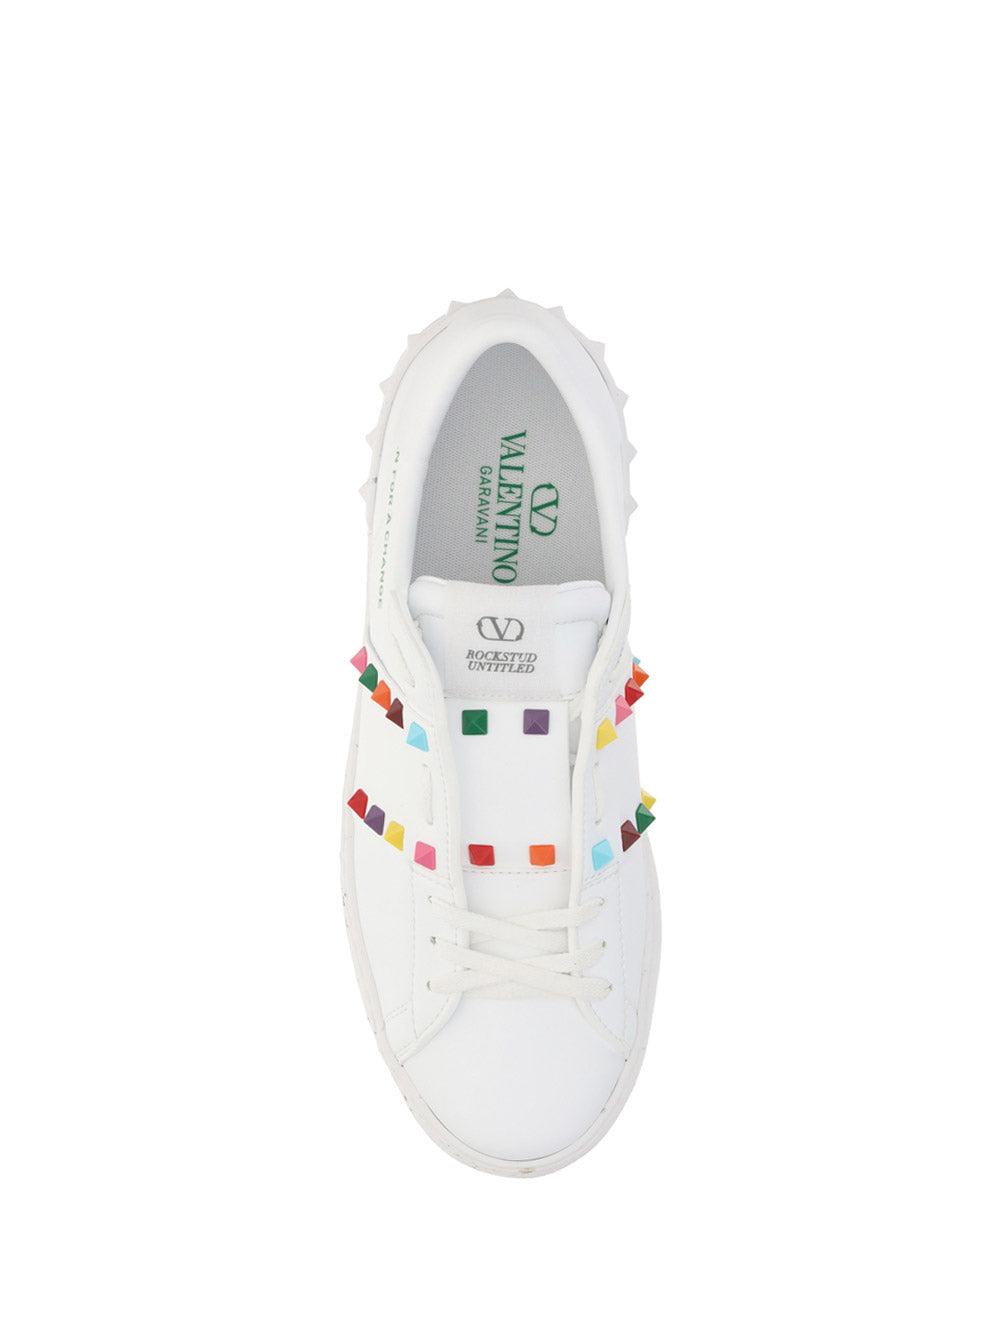 Open For A Change Sneaker In Bio-Based Material - White